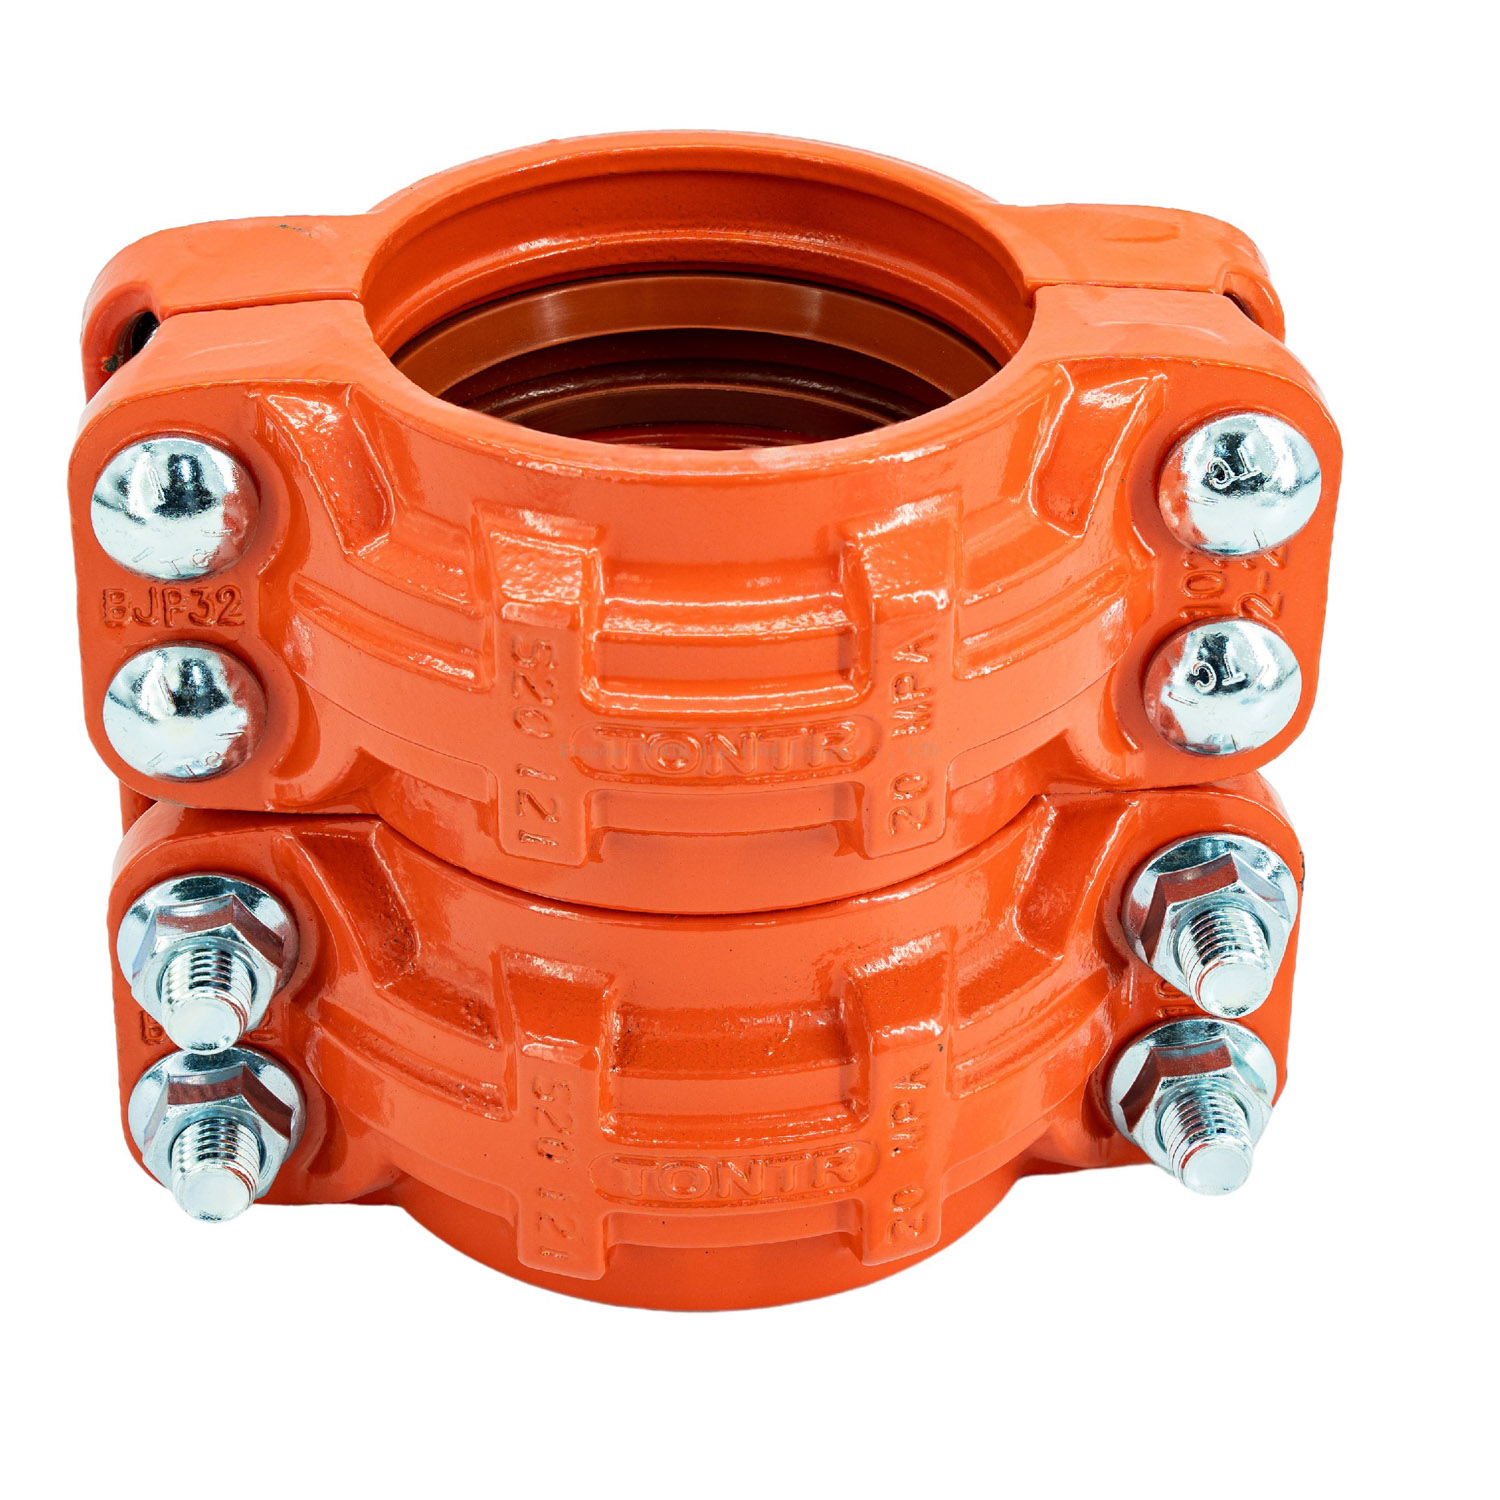 Coupling Connector Camps For the pipeline industry